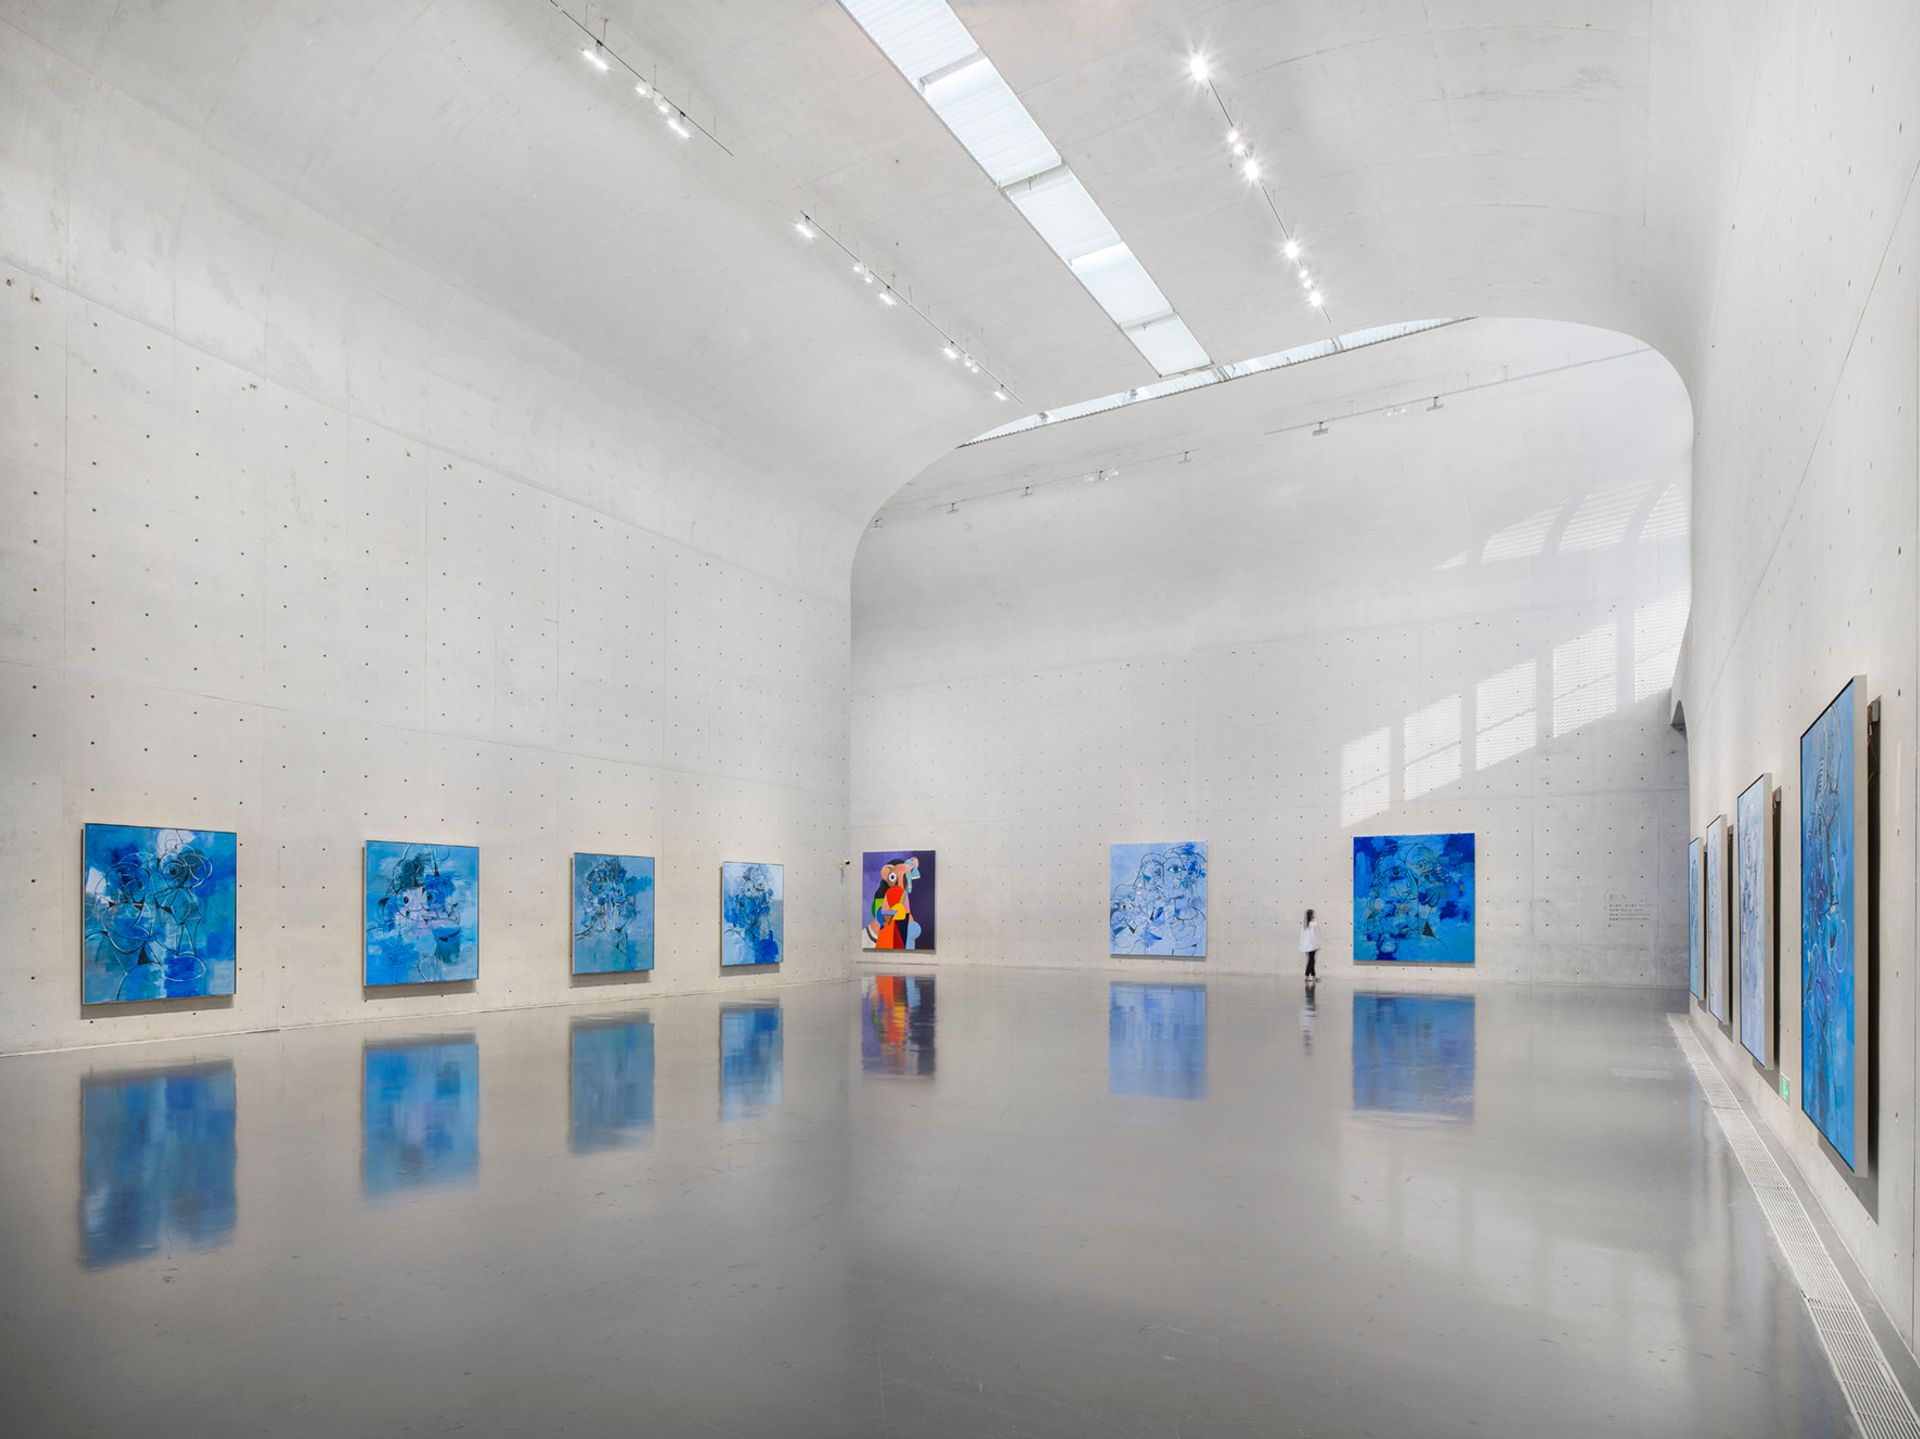 An installation view of George Condo: The Picture Gallery at the Long Museum (West Bund) in Shanghai Photo: JJYPHOTO; © George Condo; courtesy of the artist and Hauser & Wirth

